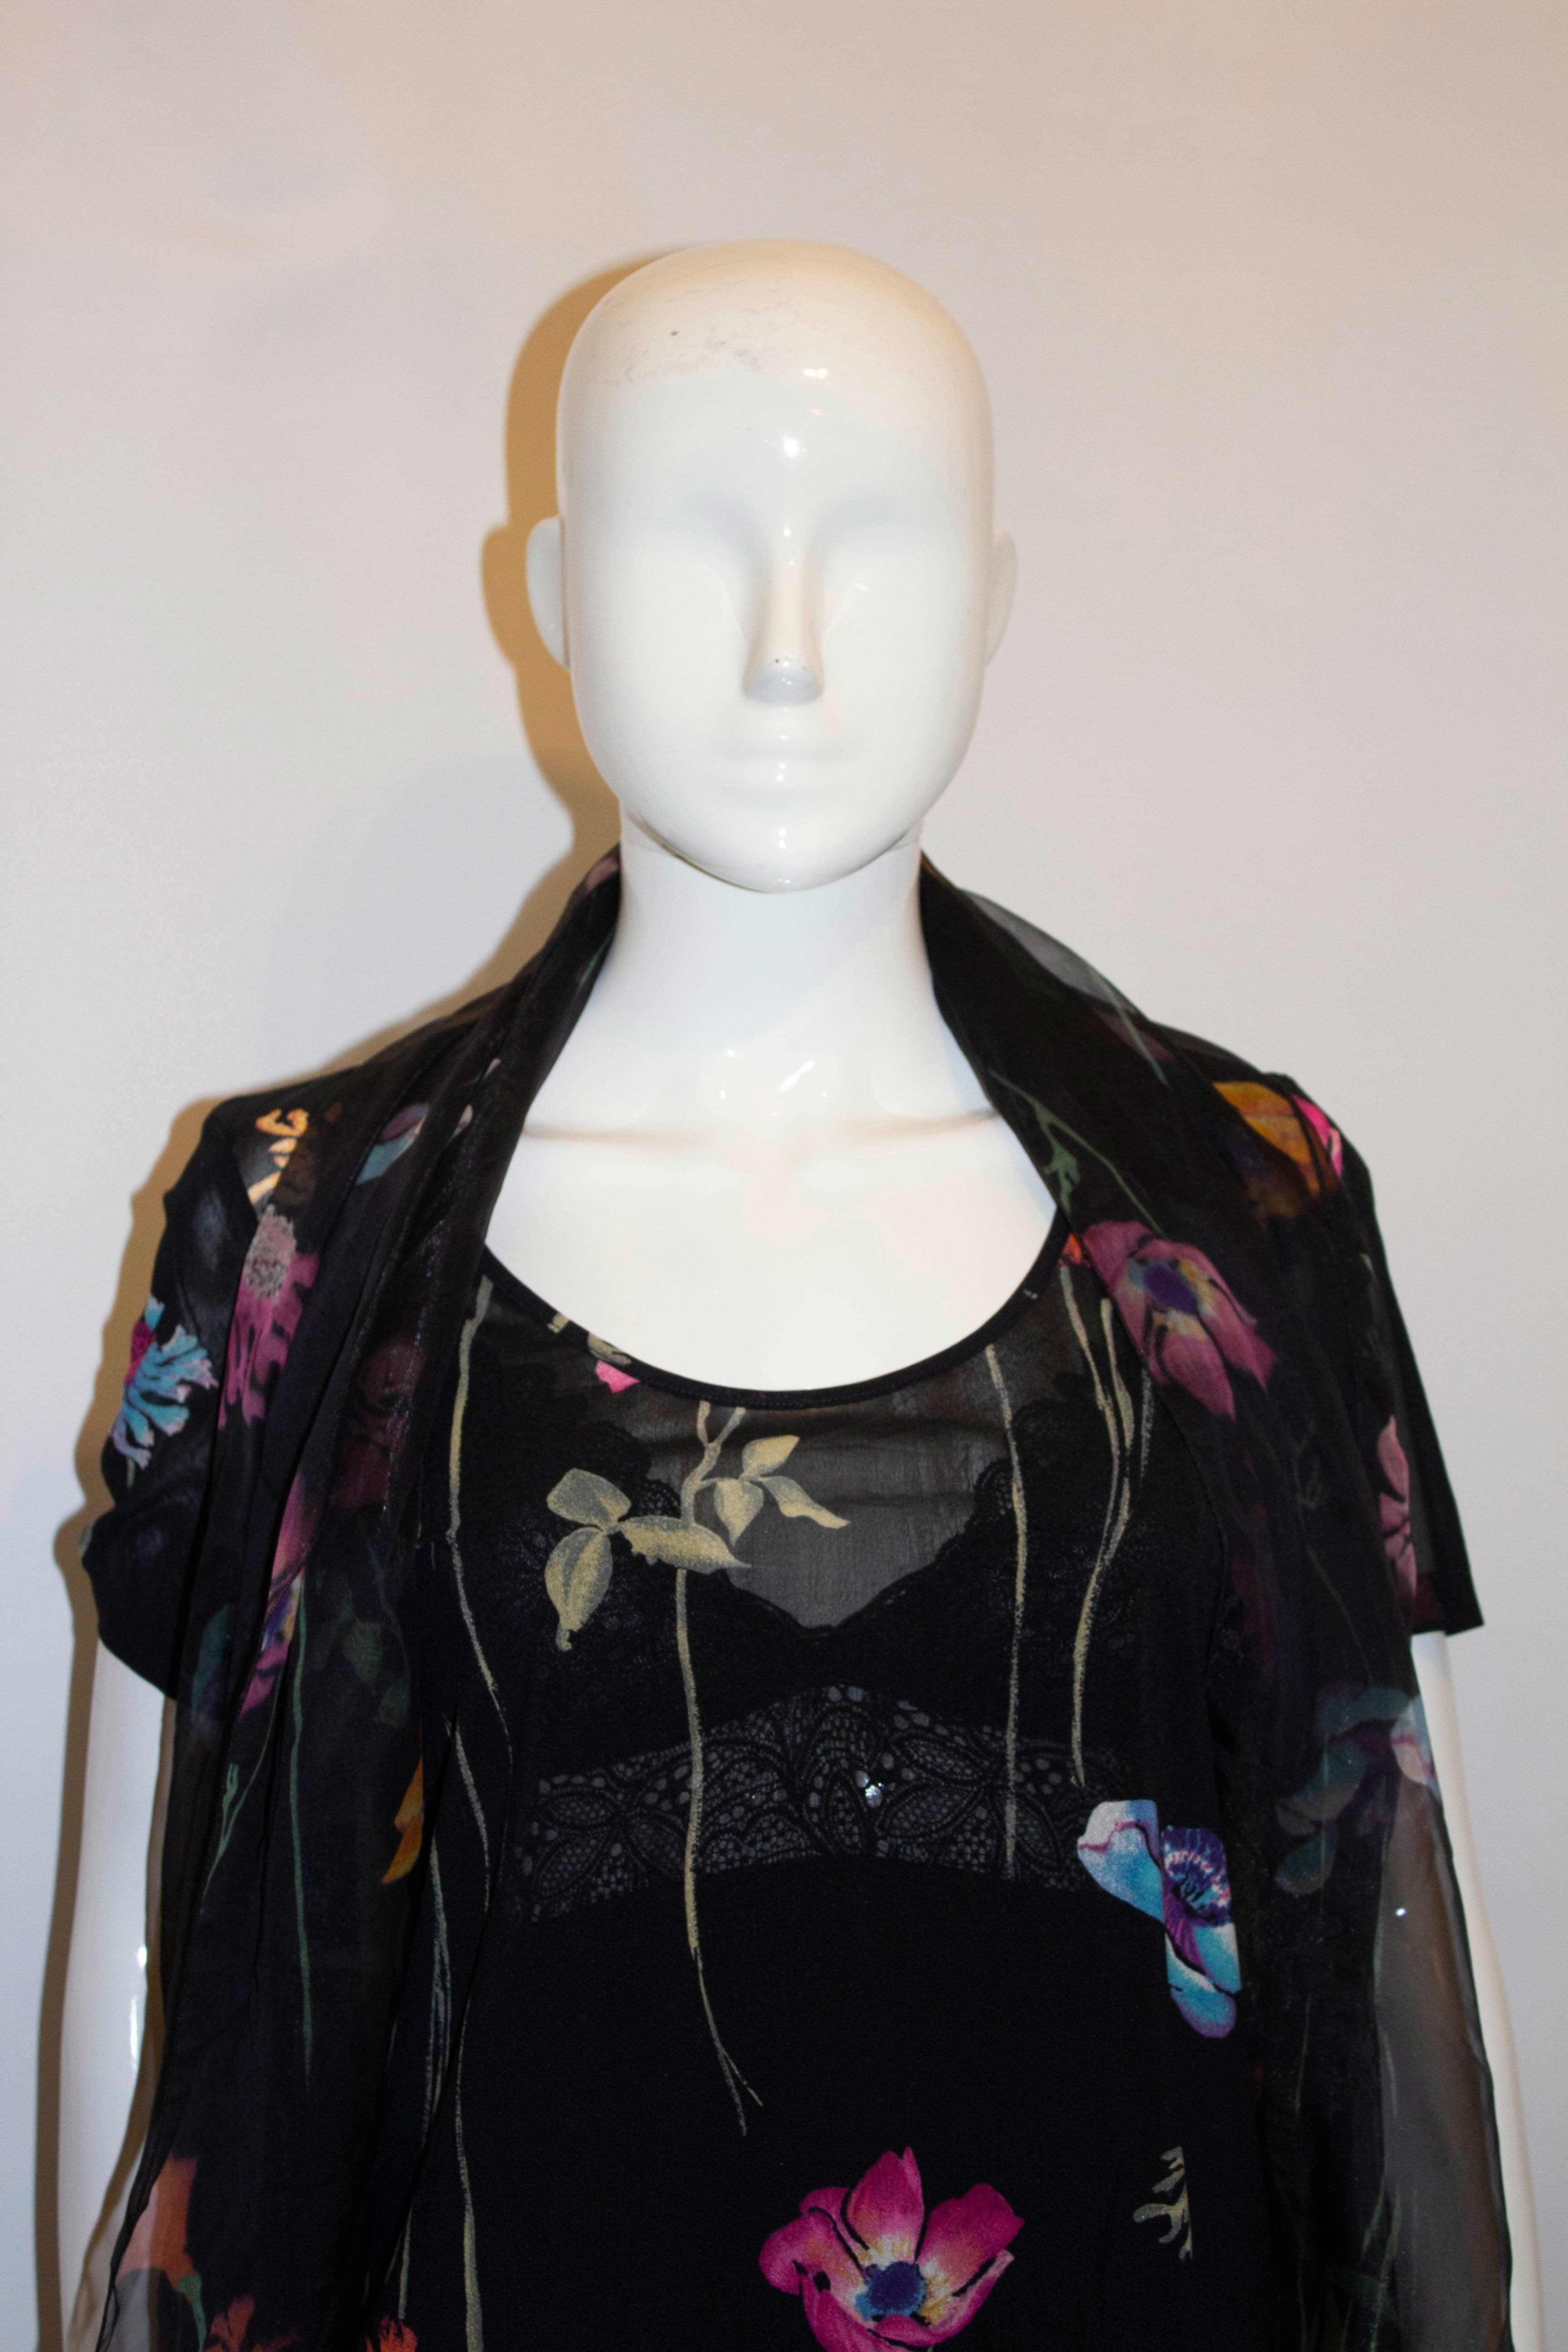 Women's Kenzo Foral Print Top with Matching Scarf For Sale